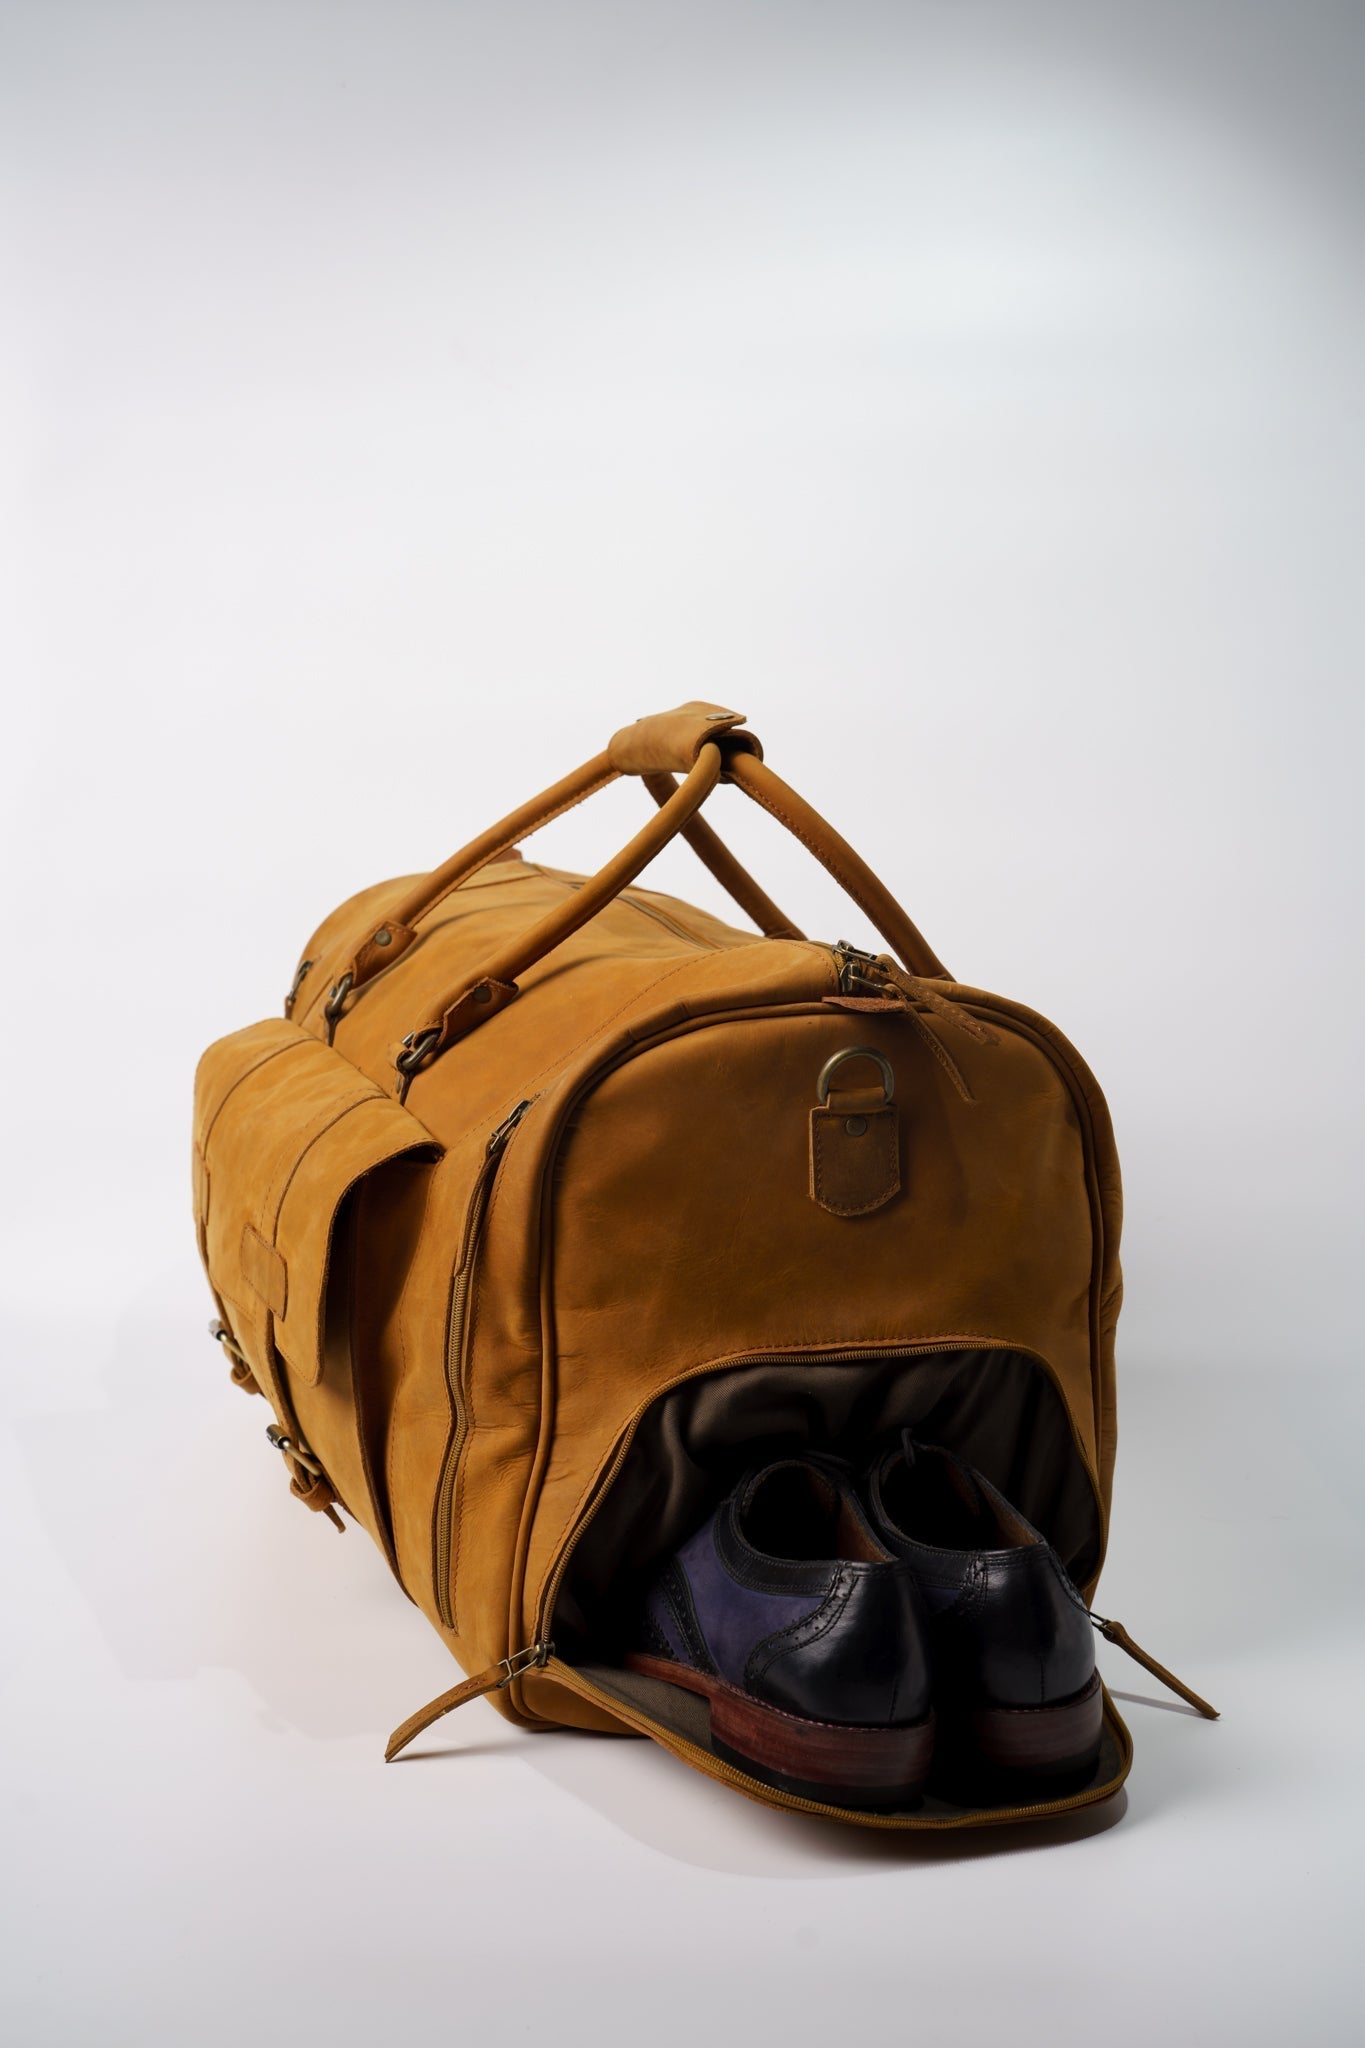 Side view of Chamra's Matte Leather Duffel bag with shoe compartment. This shot showcases the compartment for the shoes on the side of the bag. A pair of black oxford shoes can be seen popping out of the designated shoe compartment.